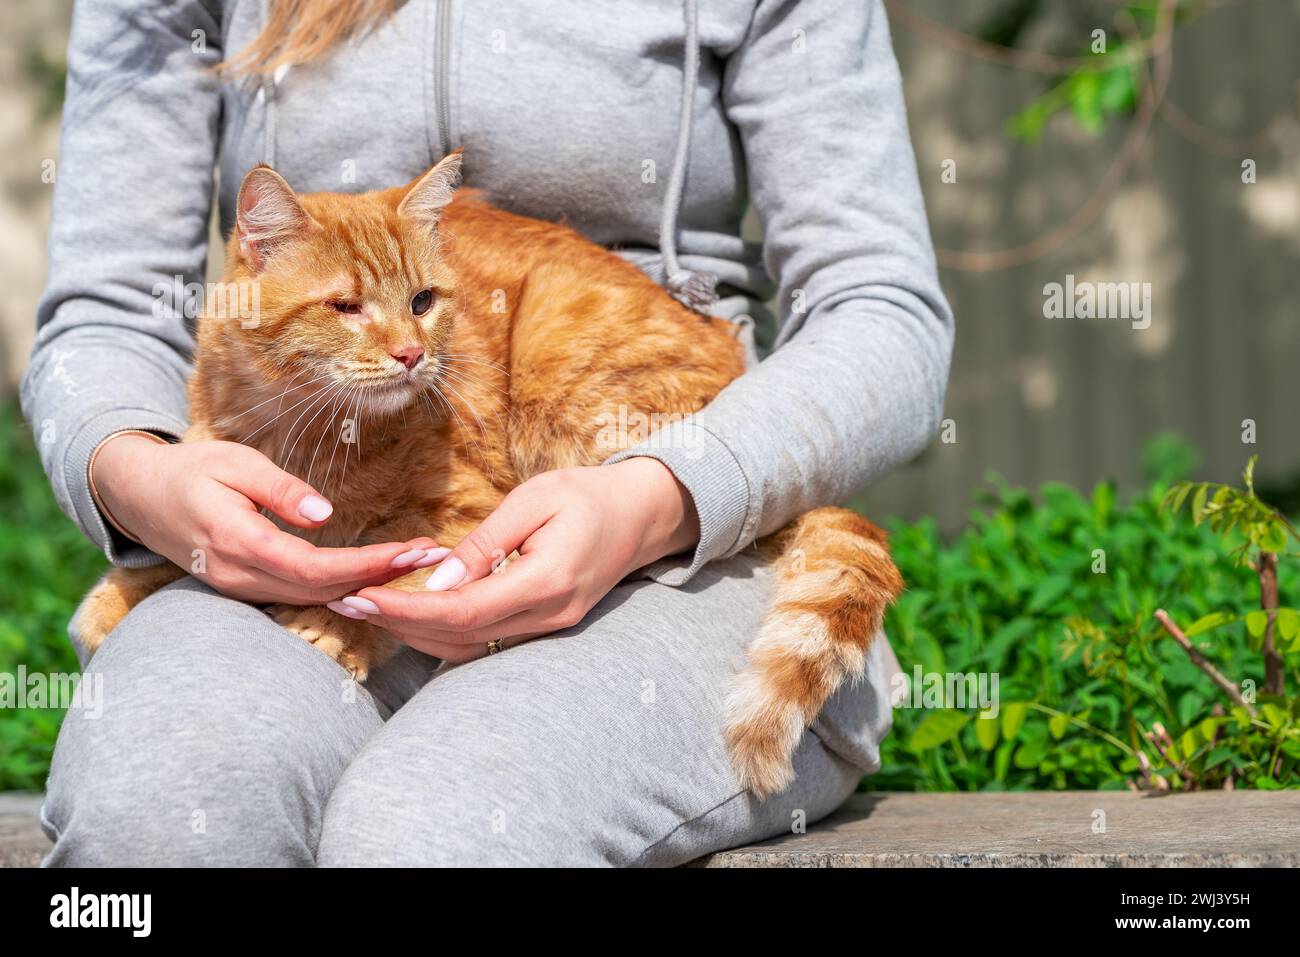 Adoption a one-eyed bright red cat sits on the lap of a woman in a gray suit outdoors in summer on a sunny day Stock Photo